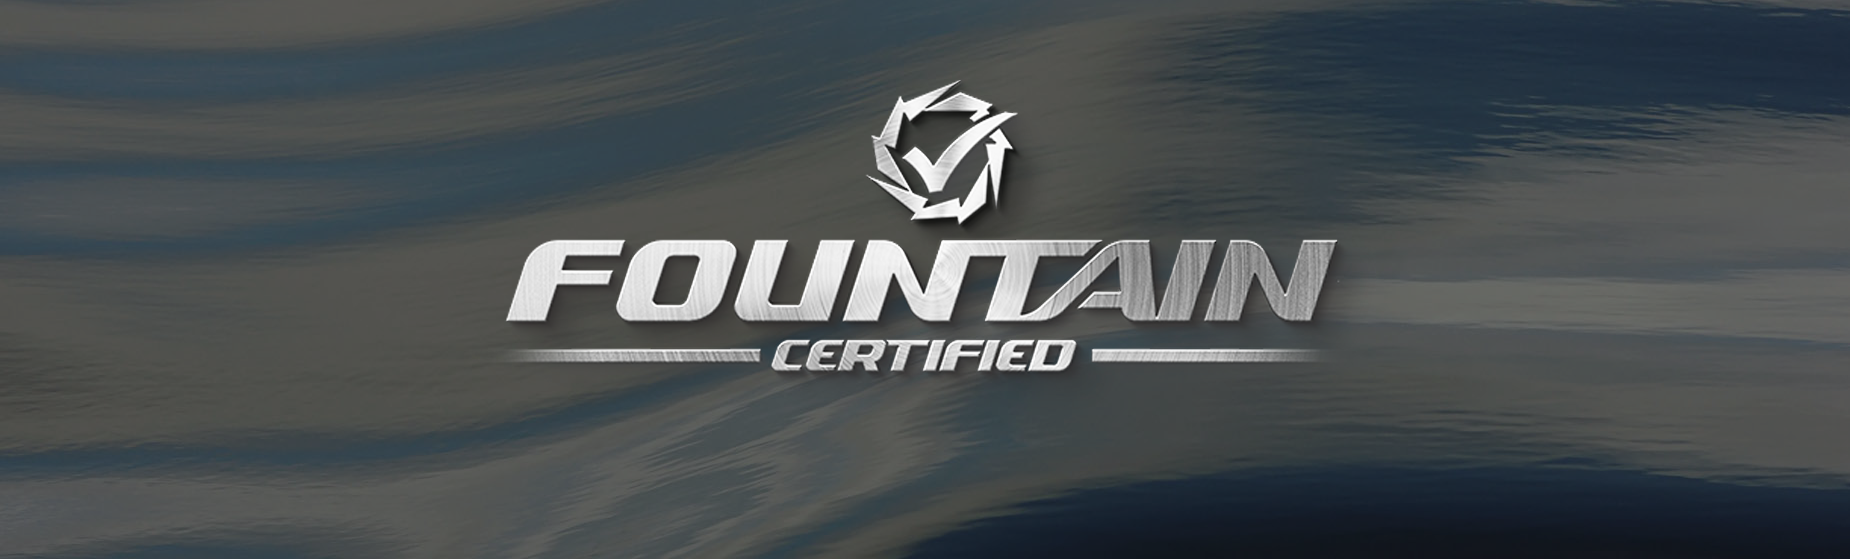 fountain powerboats clothing